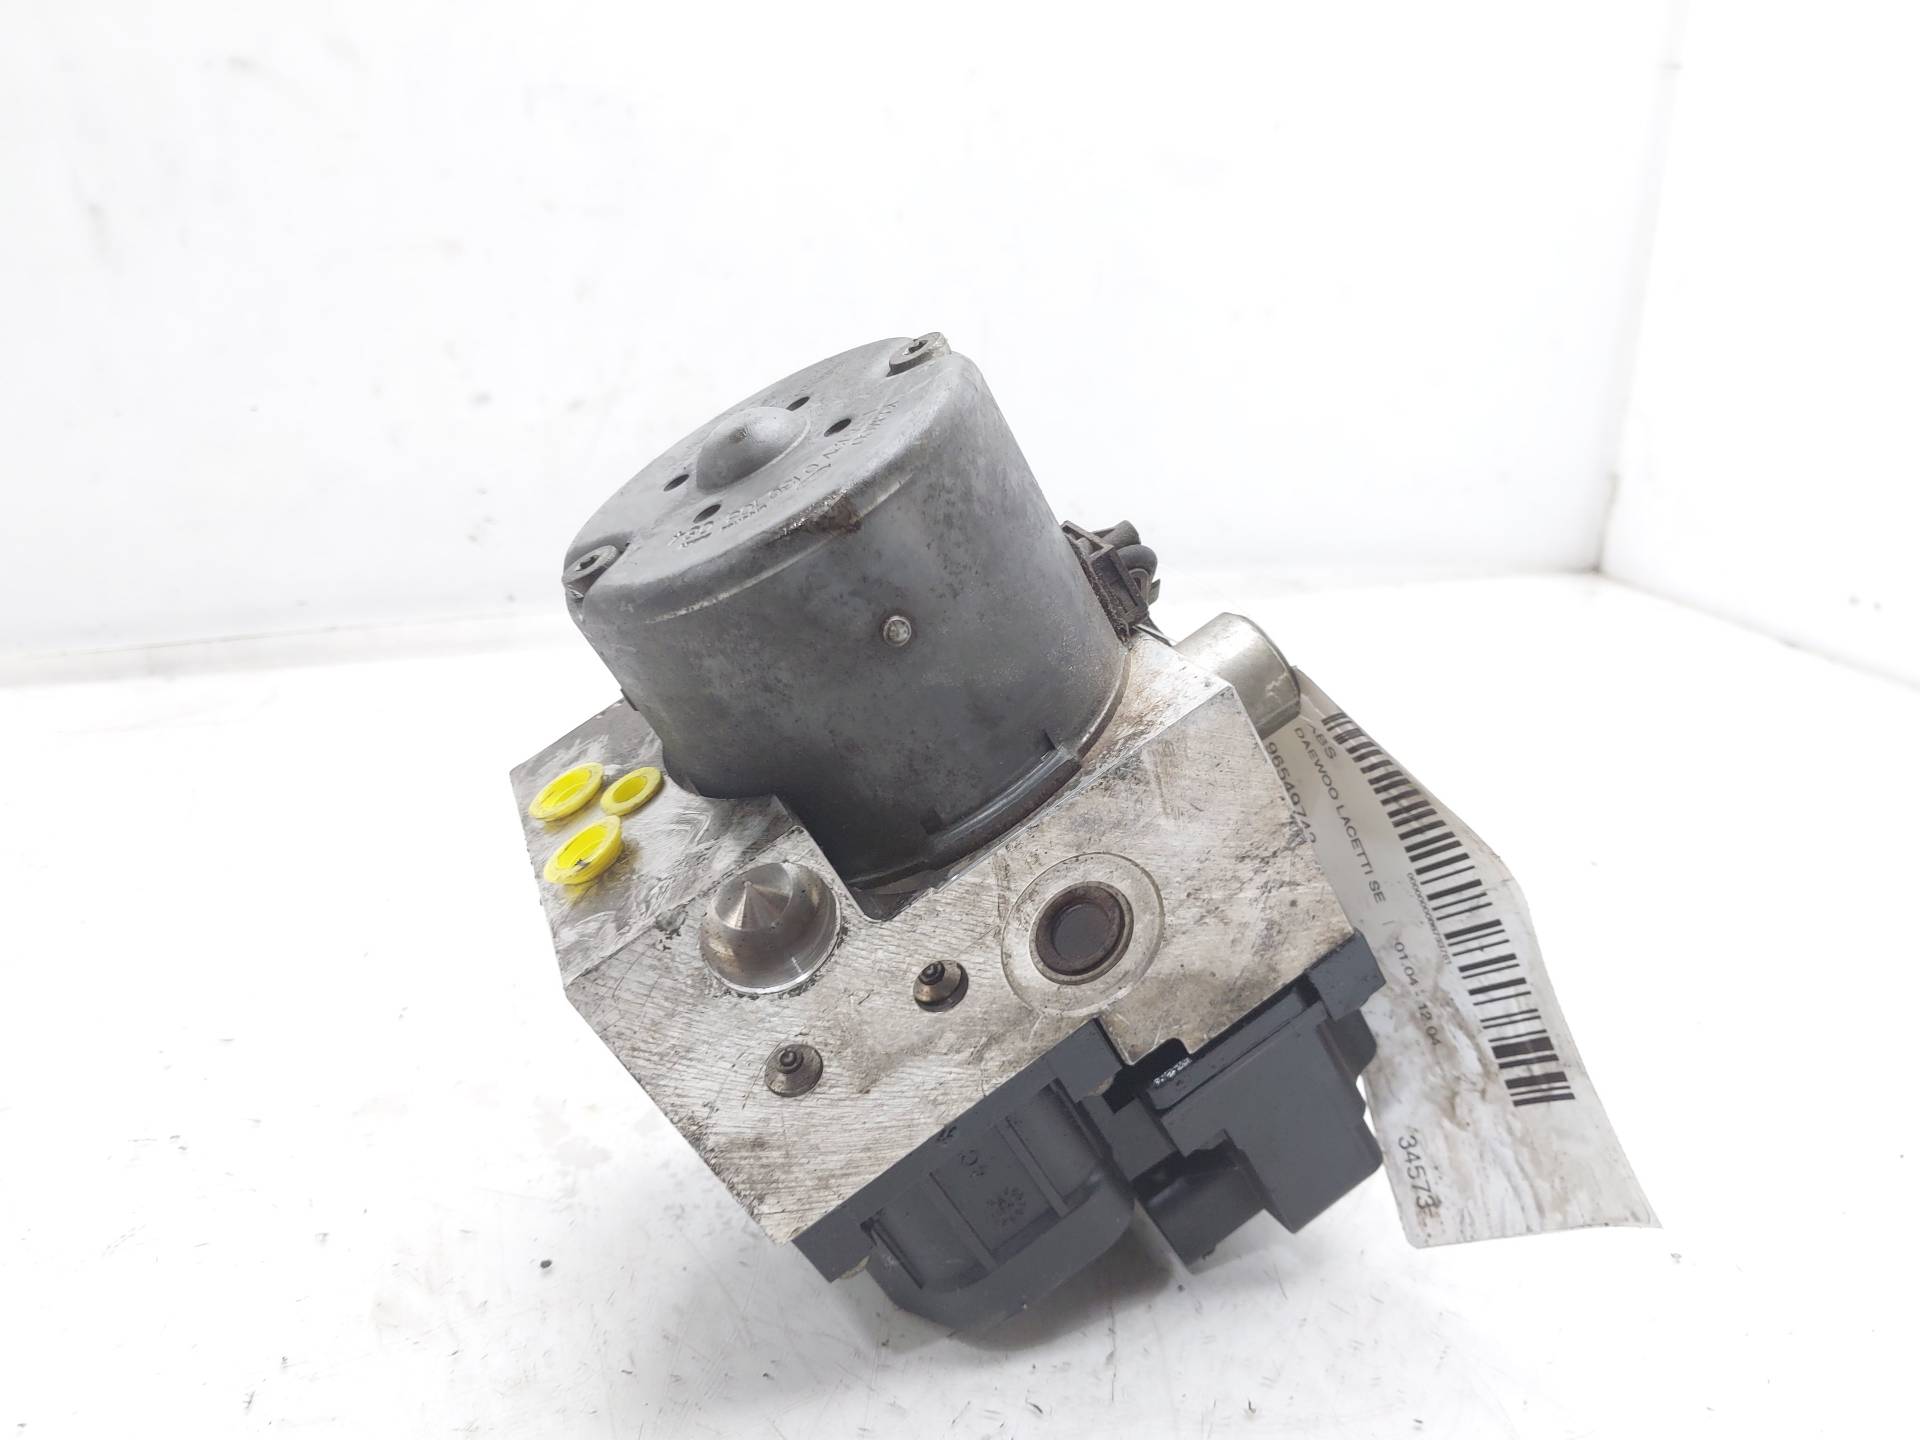 DAEWOO Lacetti 1 generation (2002-2020) ABS pumpe 96549743 25293949